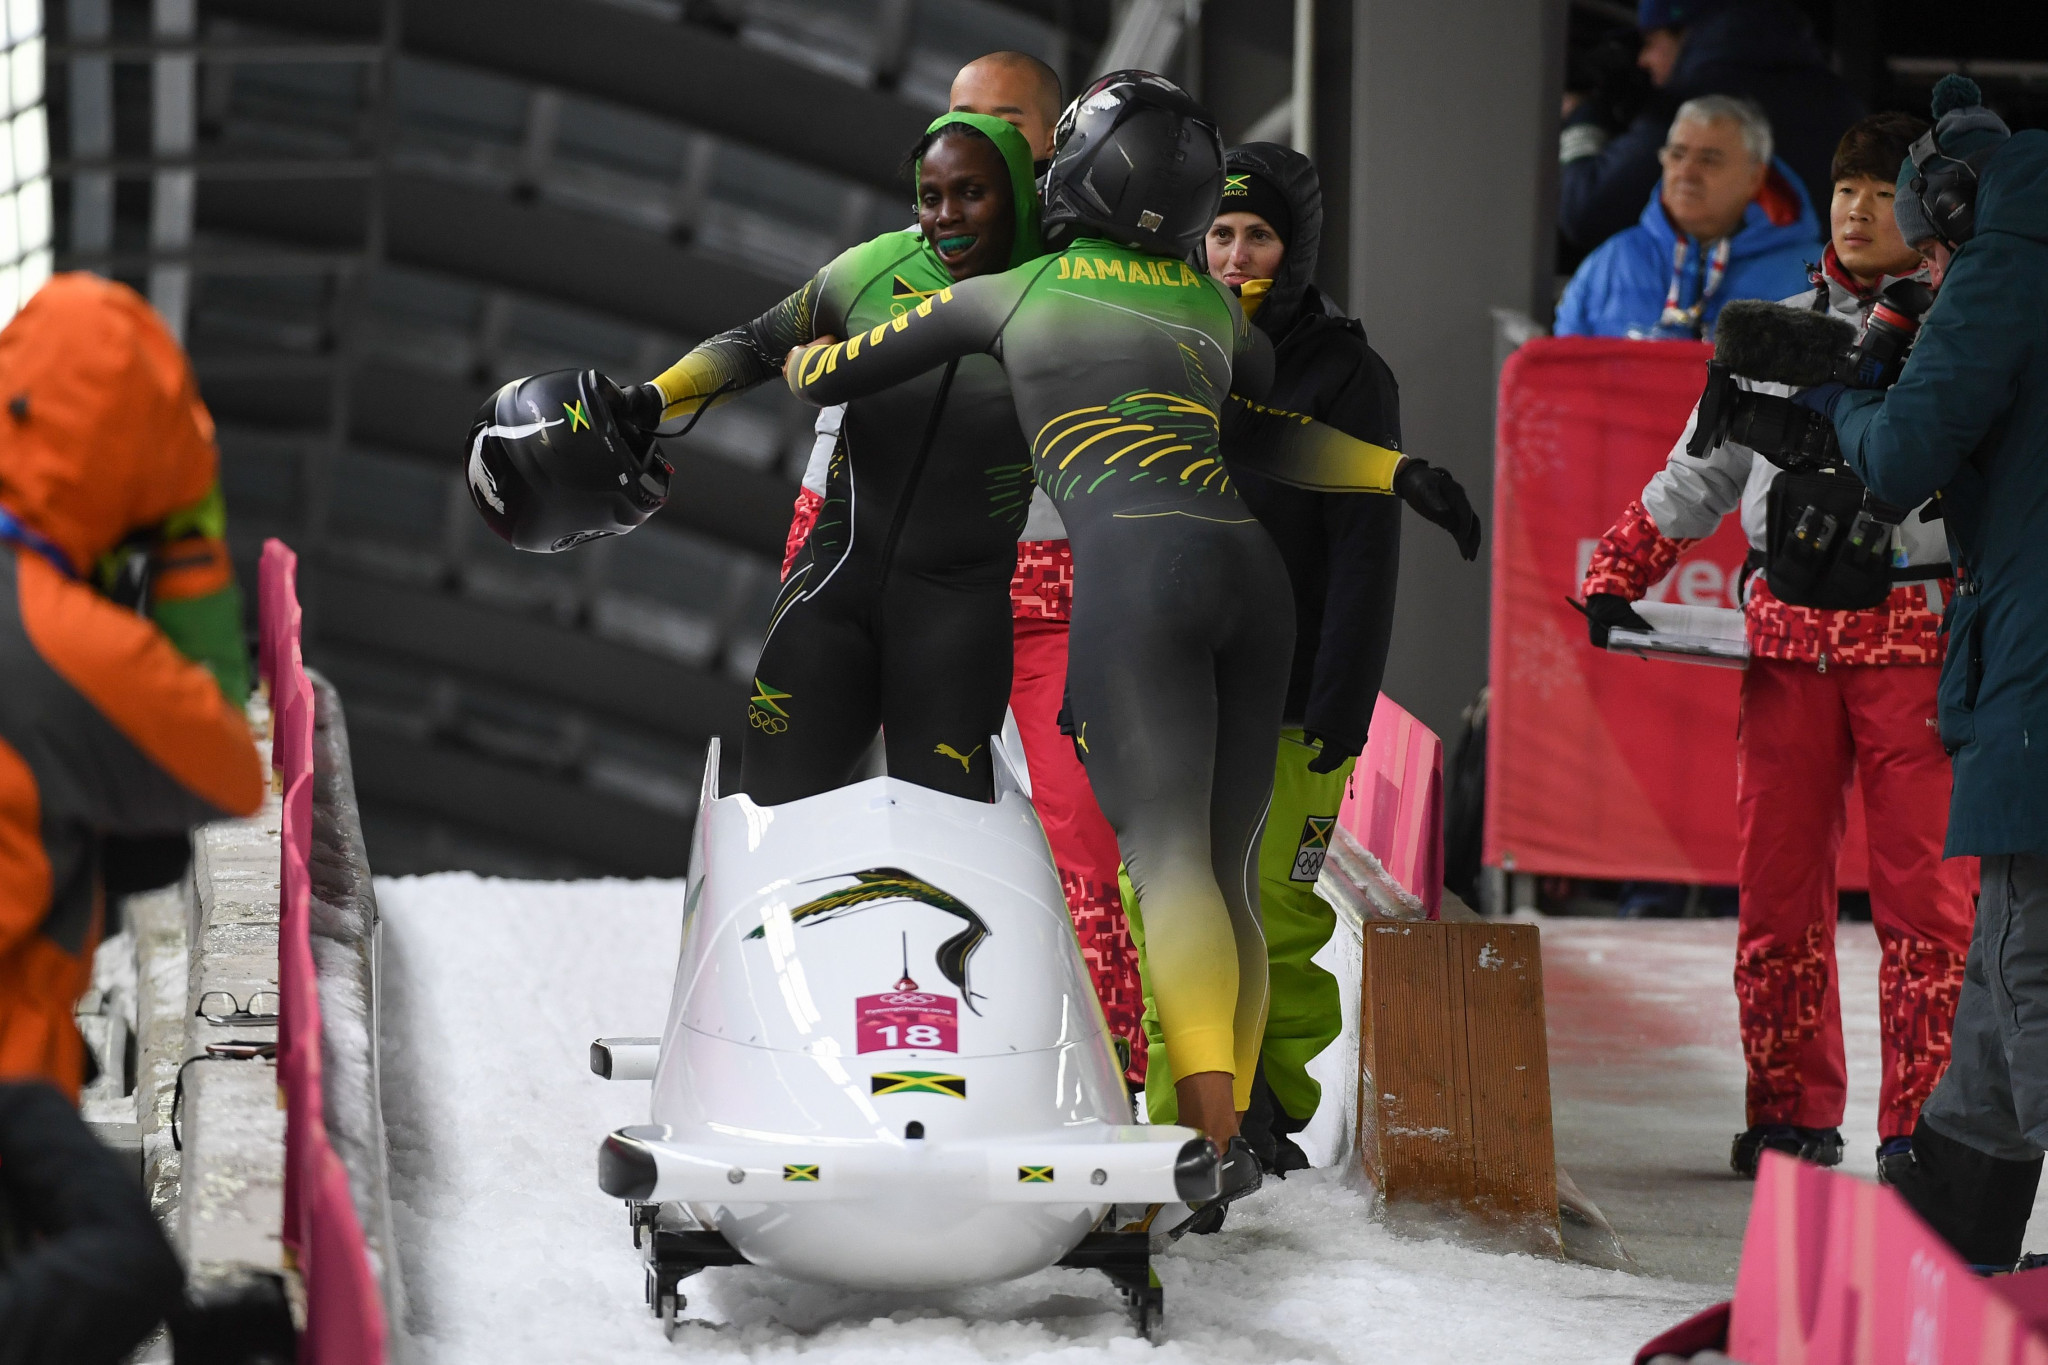 The JOA spoke of their intent to cooperate with Latvia in bobsleigh ©Getty Images